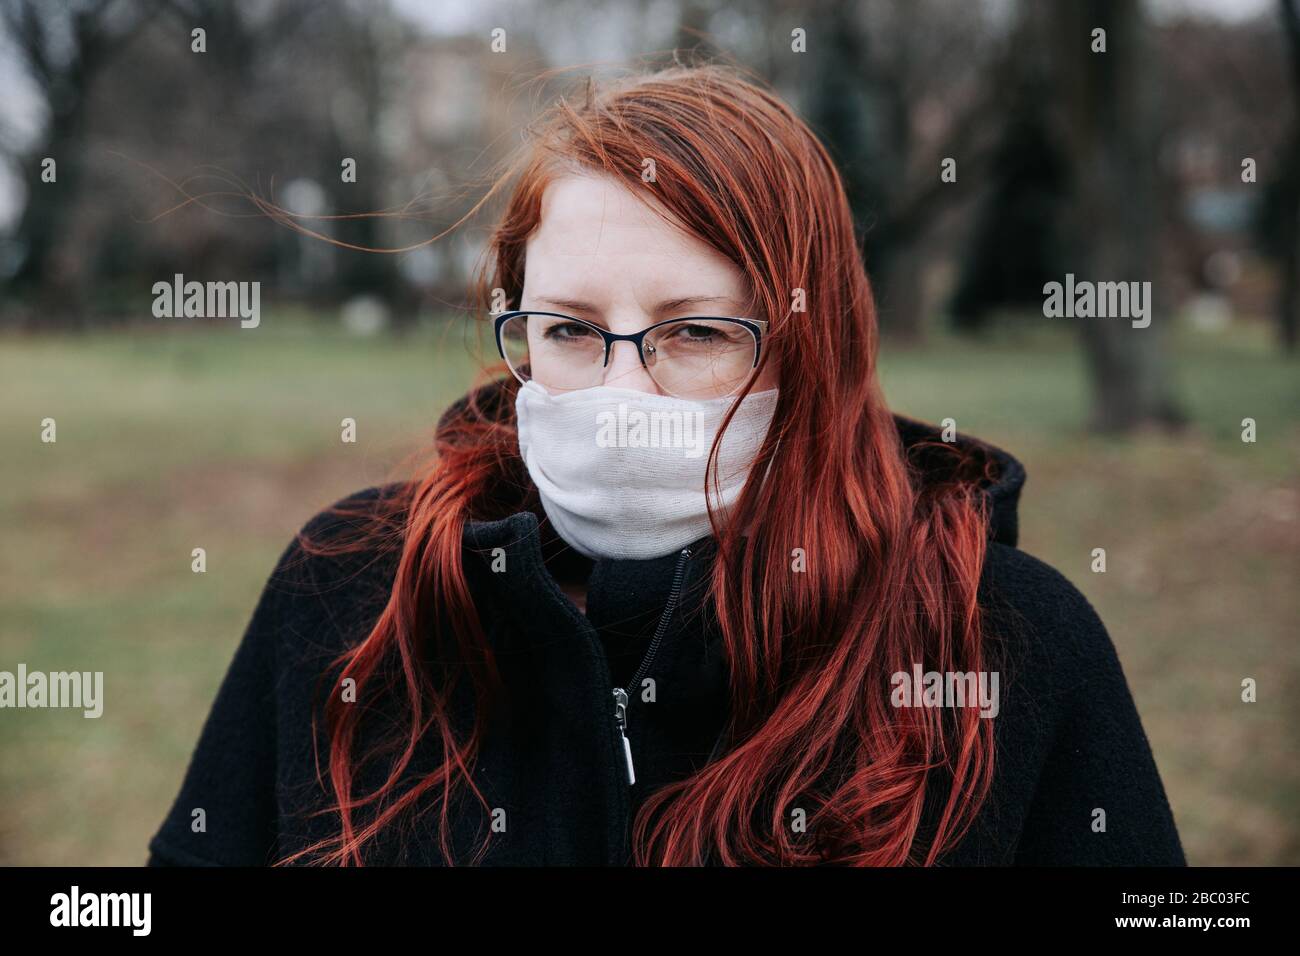 Cold and flu. Woman with a medical face mask in park outdoor Stock Photo